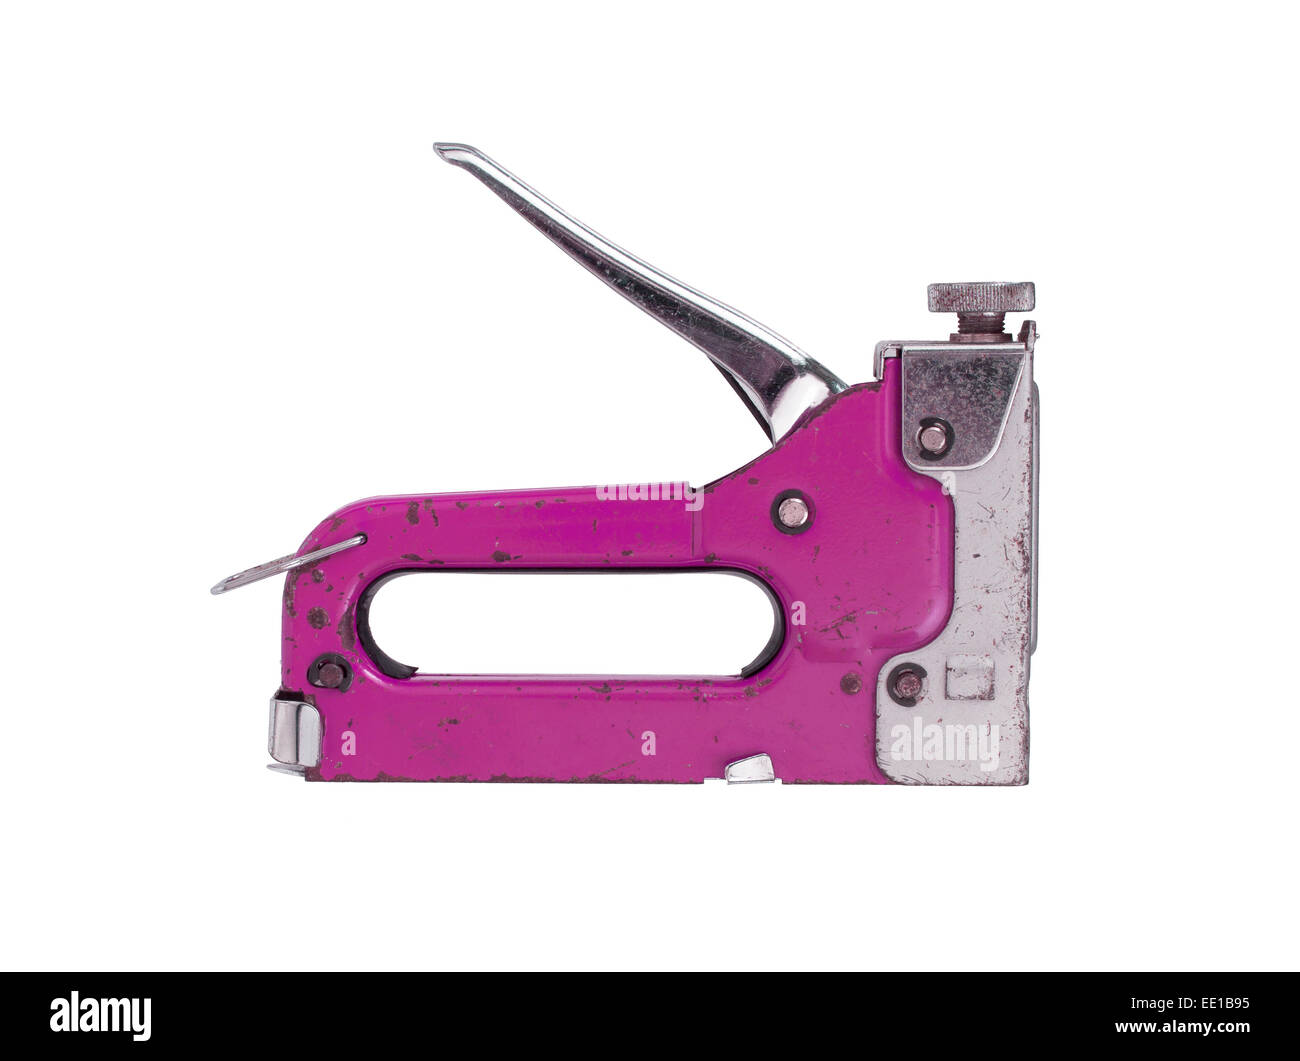 Construction hand-held stapler, isolated on white background, pink Stock Photo